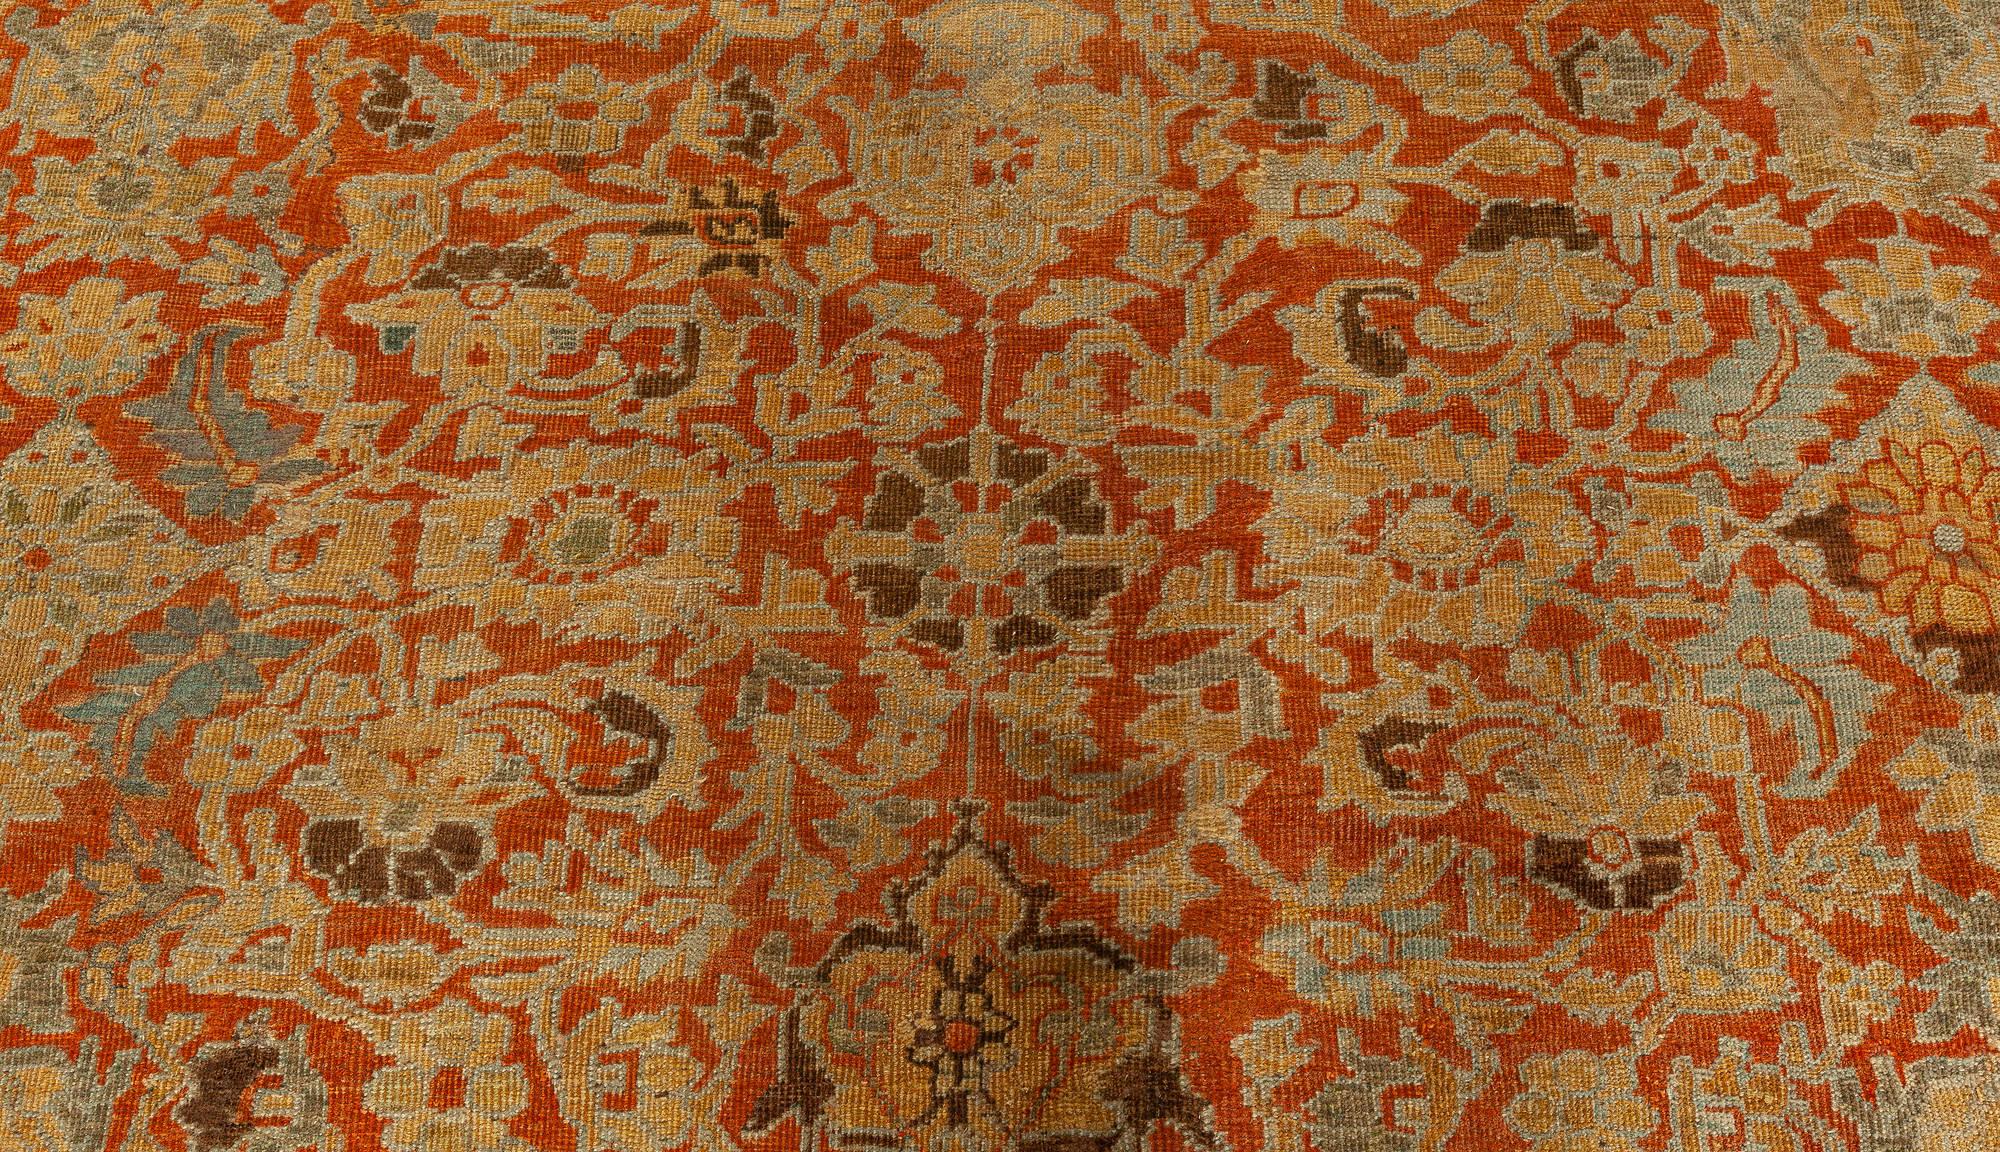 One-of-a-kind antique Persian Sultanabad rug.
Size: 13'6